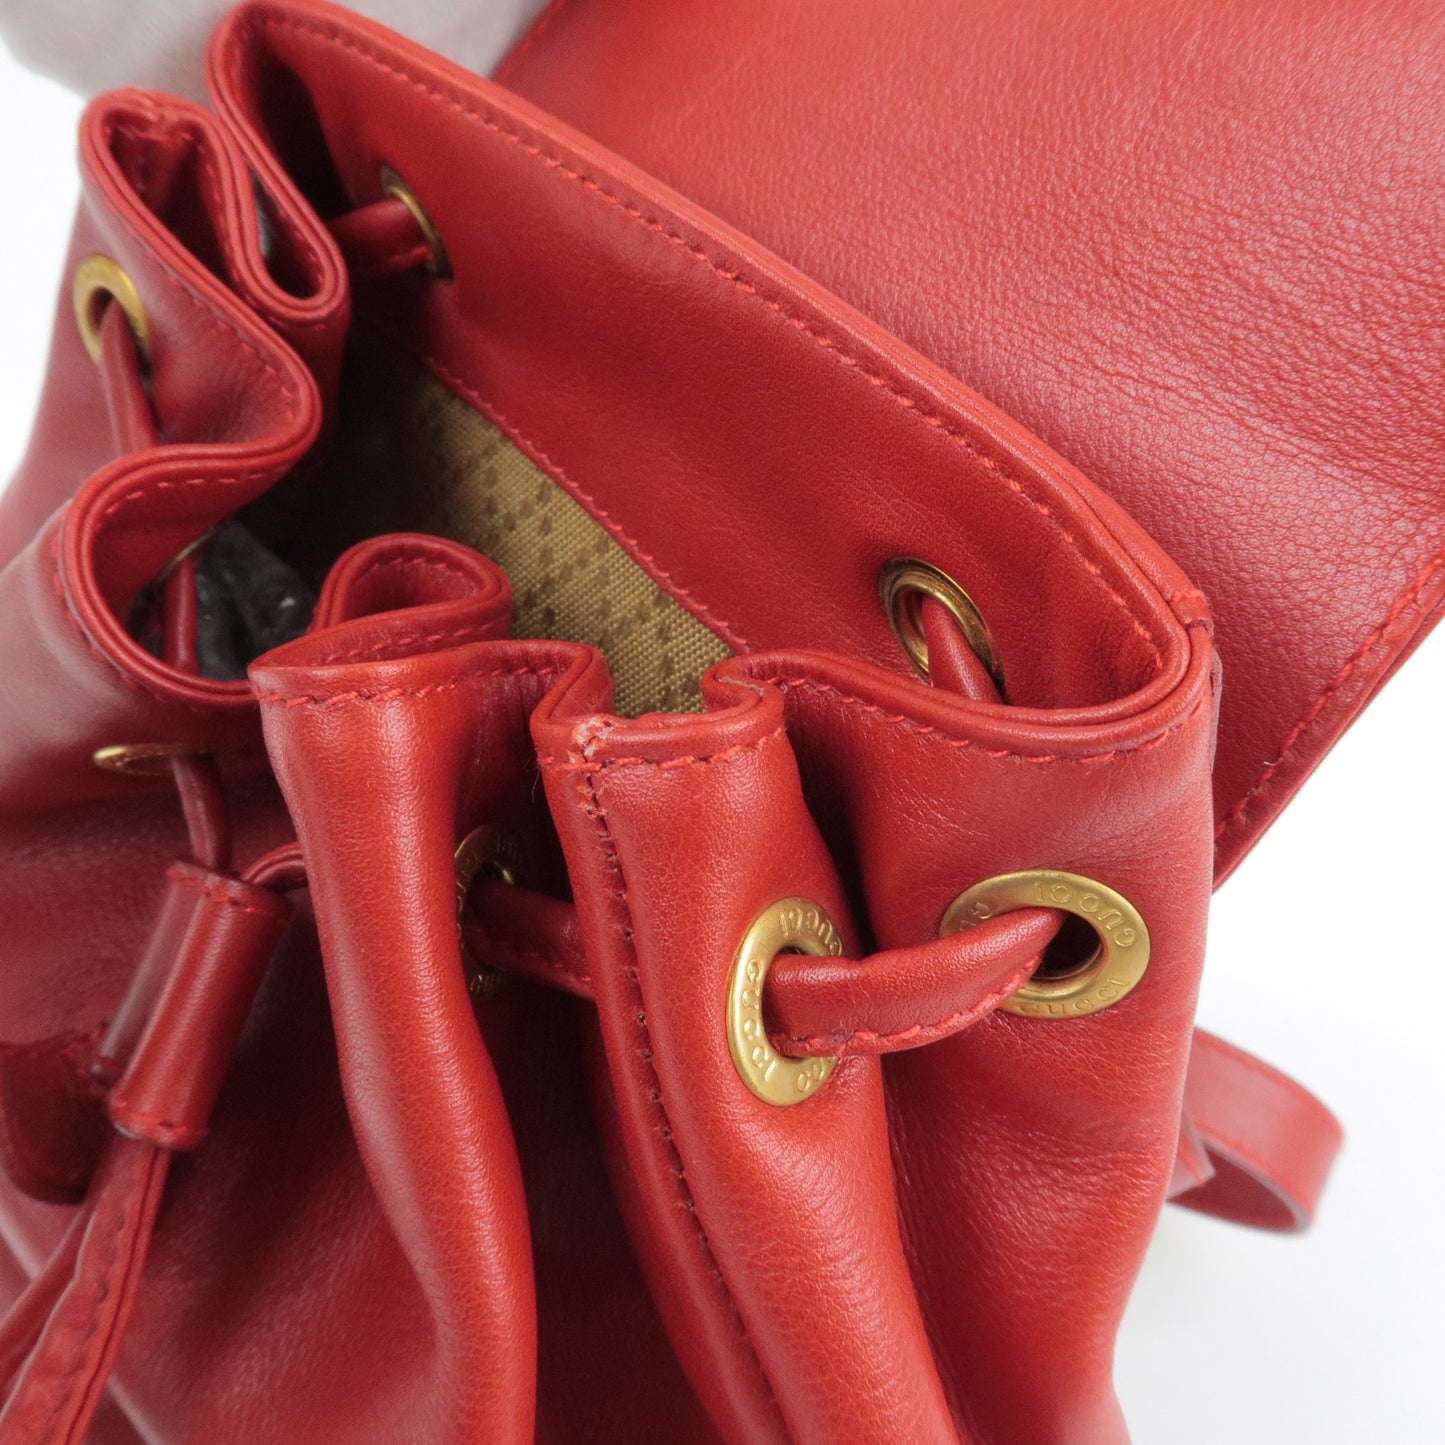 GUCCI Bamboo Leather Back Pack Ruck Sack Red 003.3444.0030